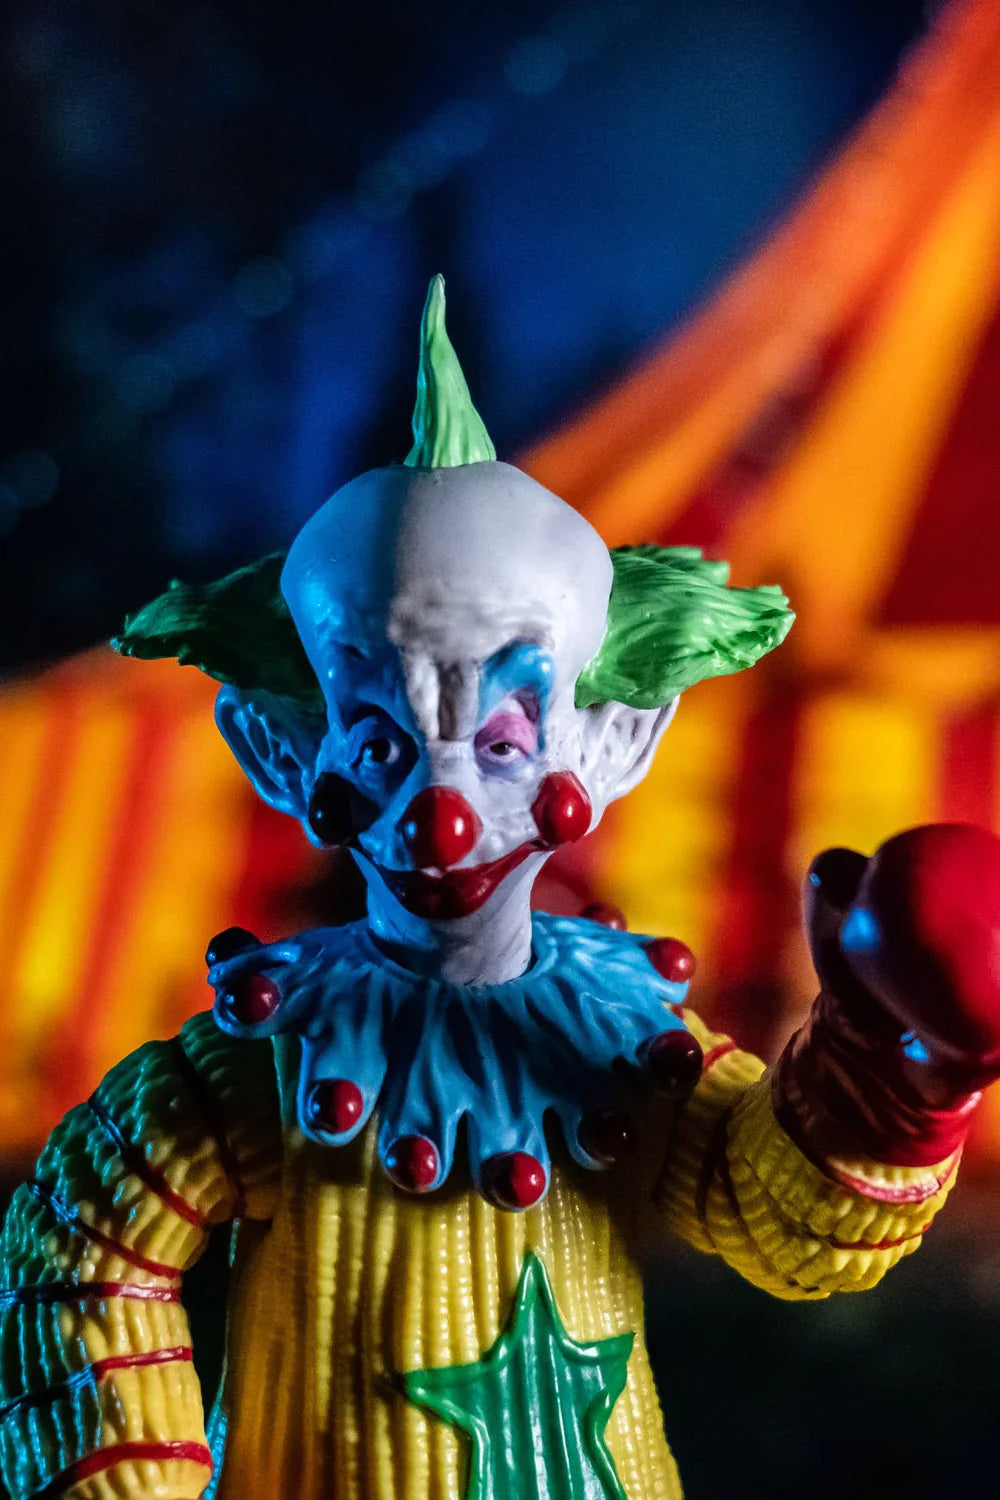 Killer Klowns from Outer Space: Shorty (Scream Greats) - 8" Action Figure: